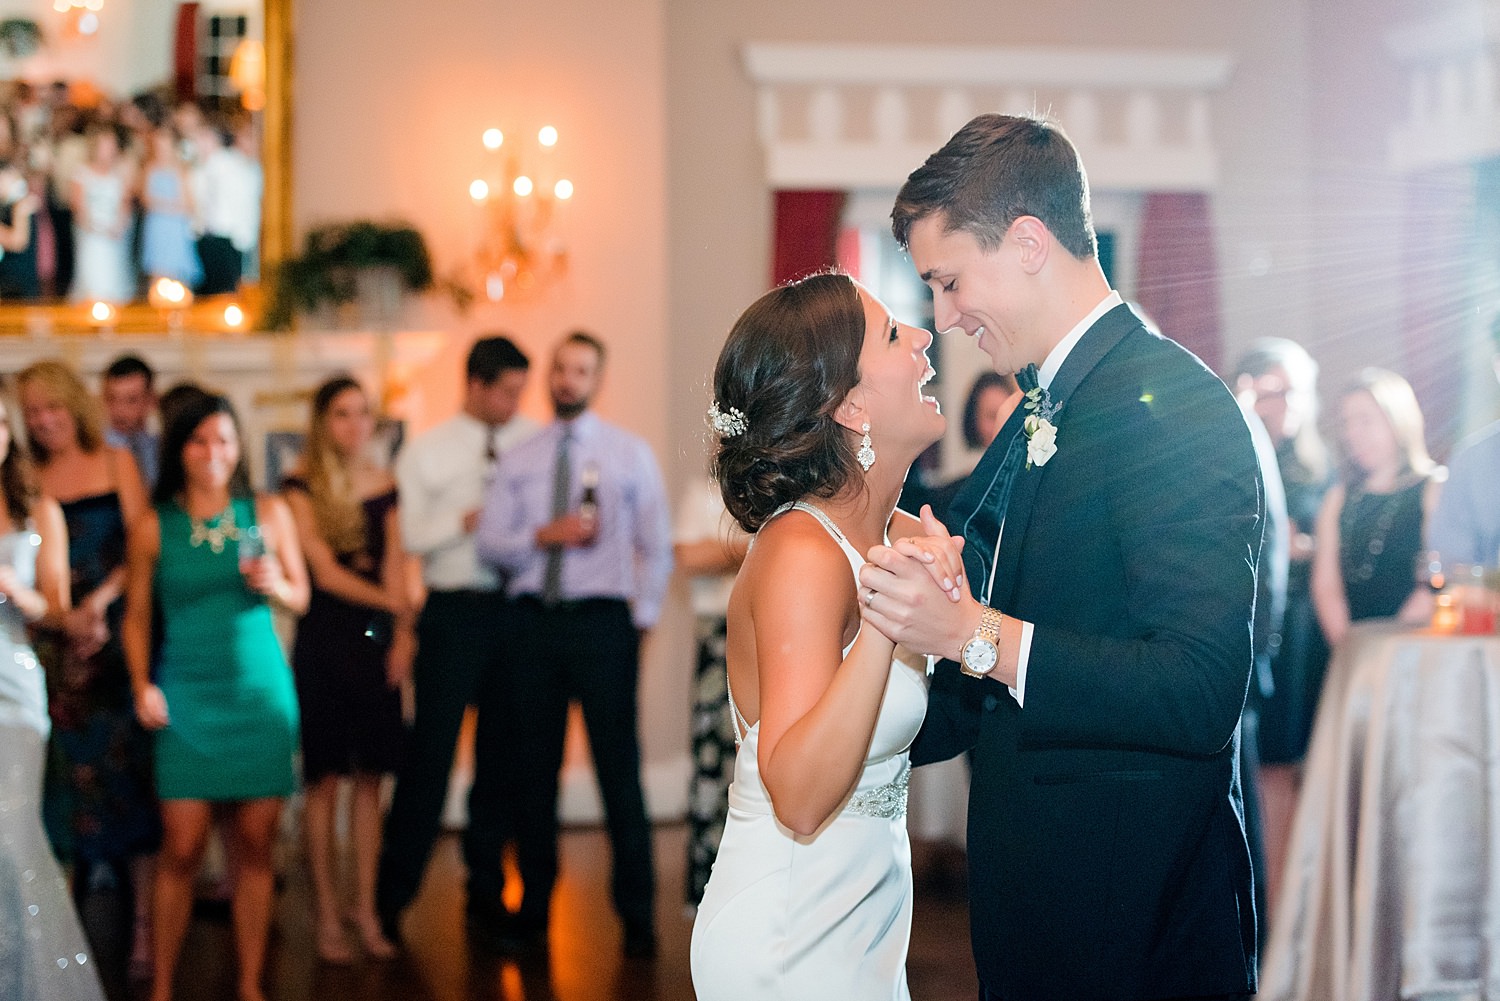 wedding first dance at fox chapel golf club • Recommended Vendors